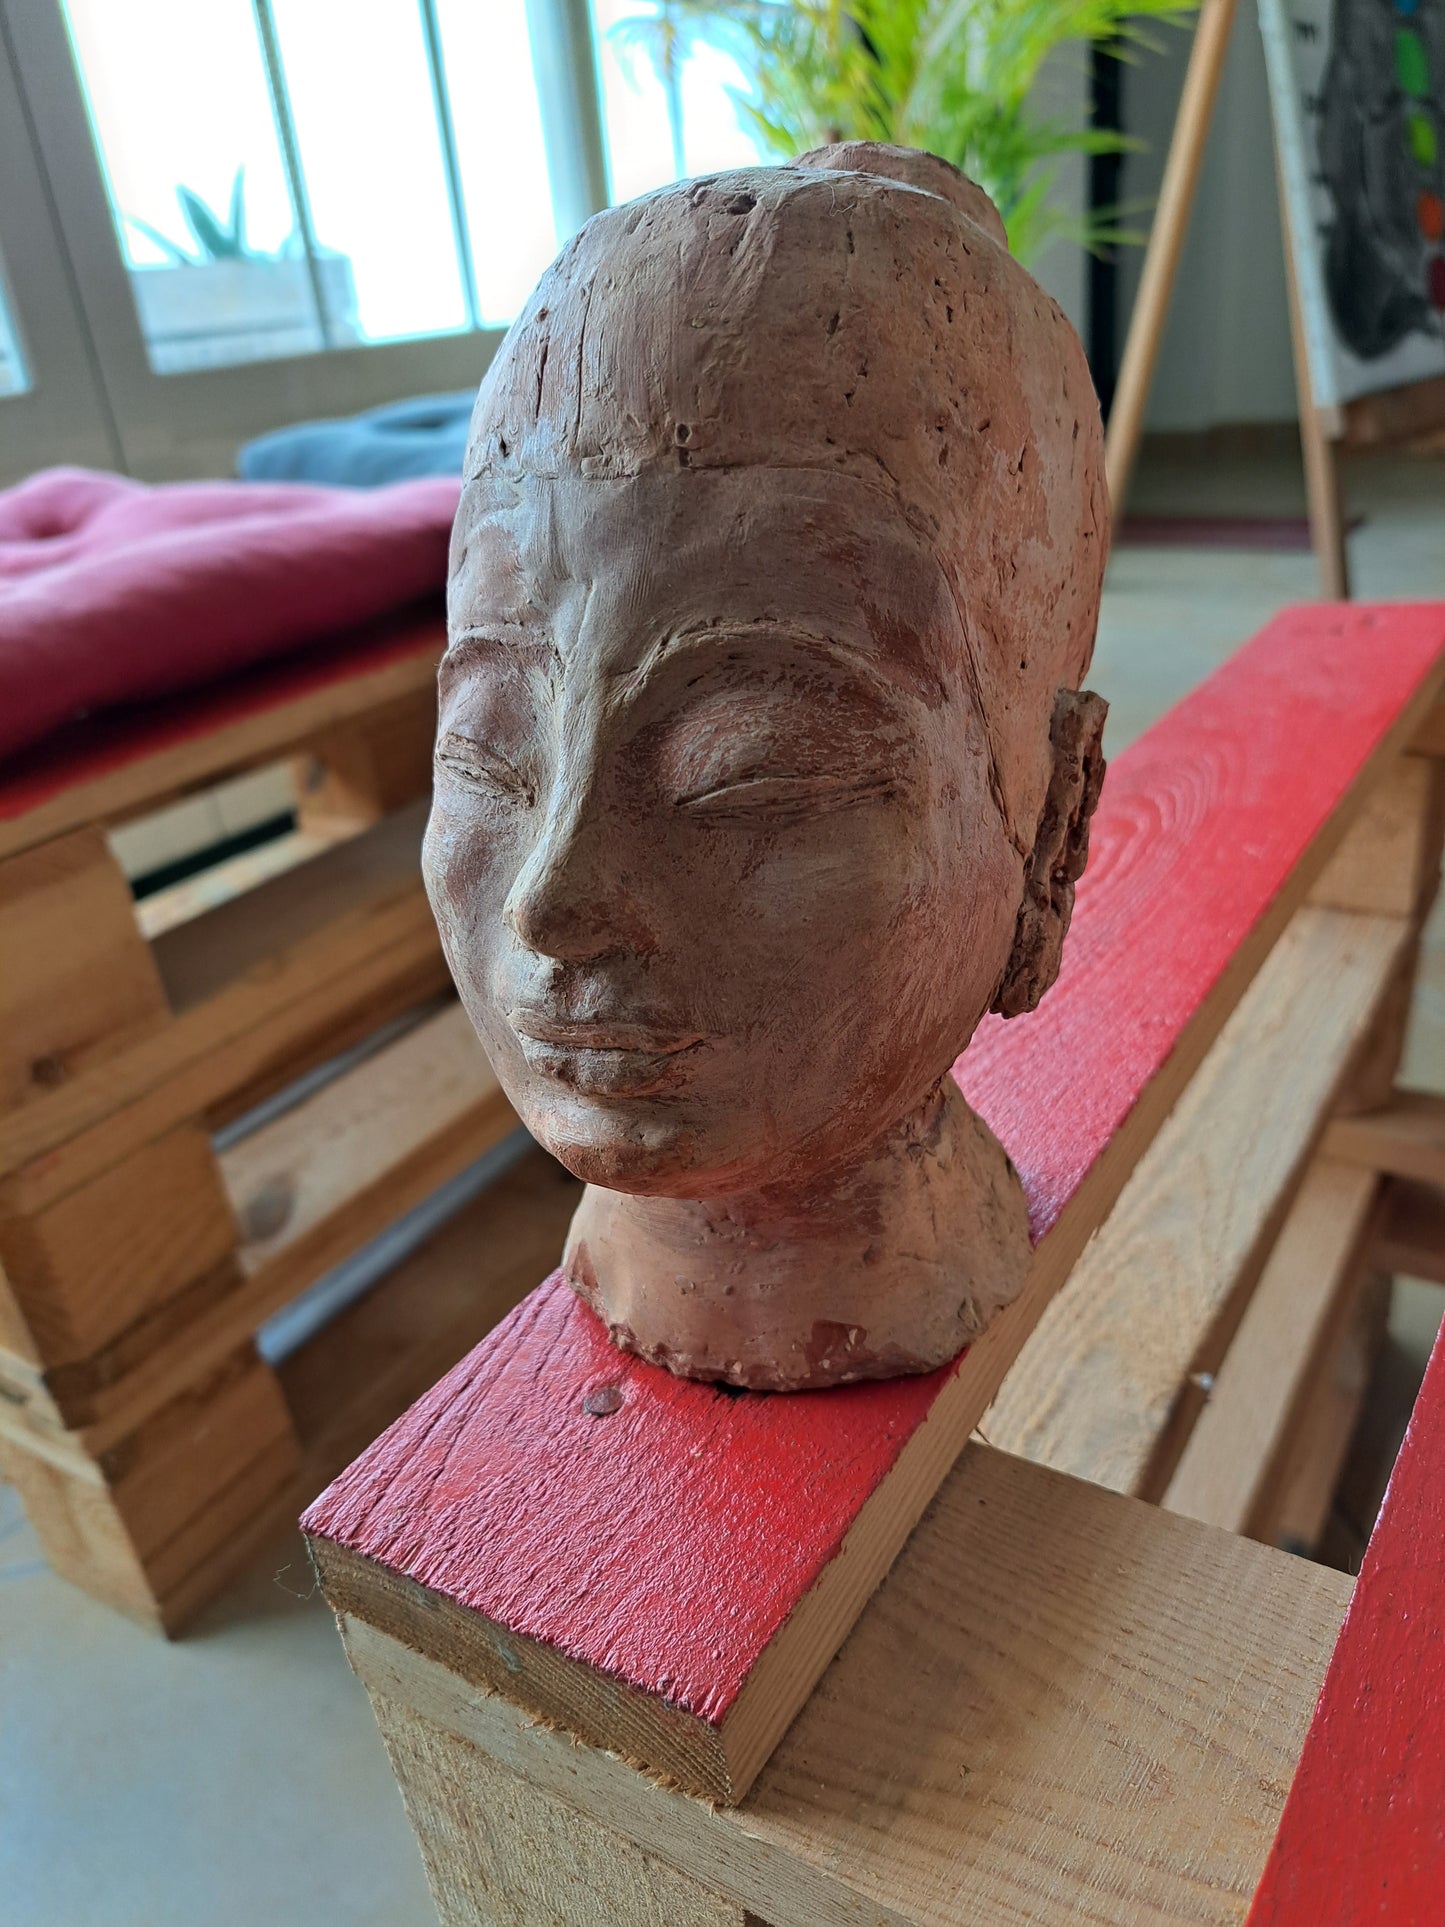 Clay Sculpture Workshop and Reiki Healing with Anne in Cadaval, Portugal by subcultours